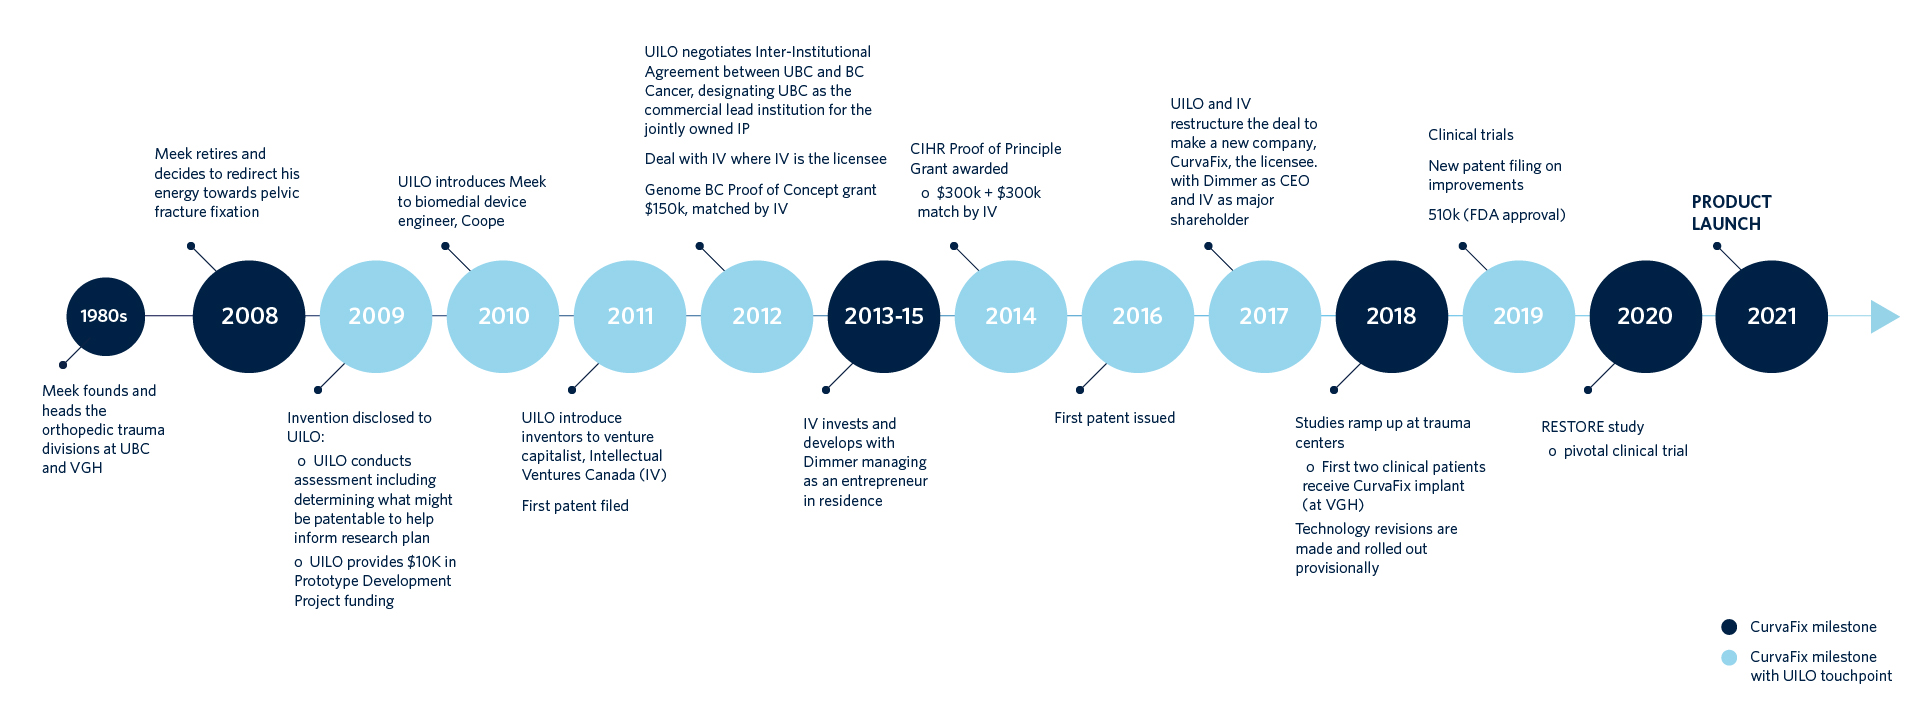 Timeline of CurvaFix milestone activities. Depicted through dark and light blue circles along a horizonal line.